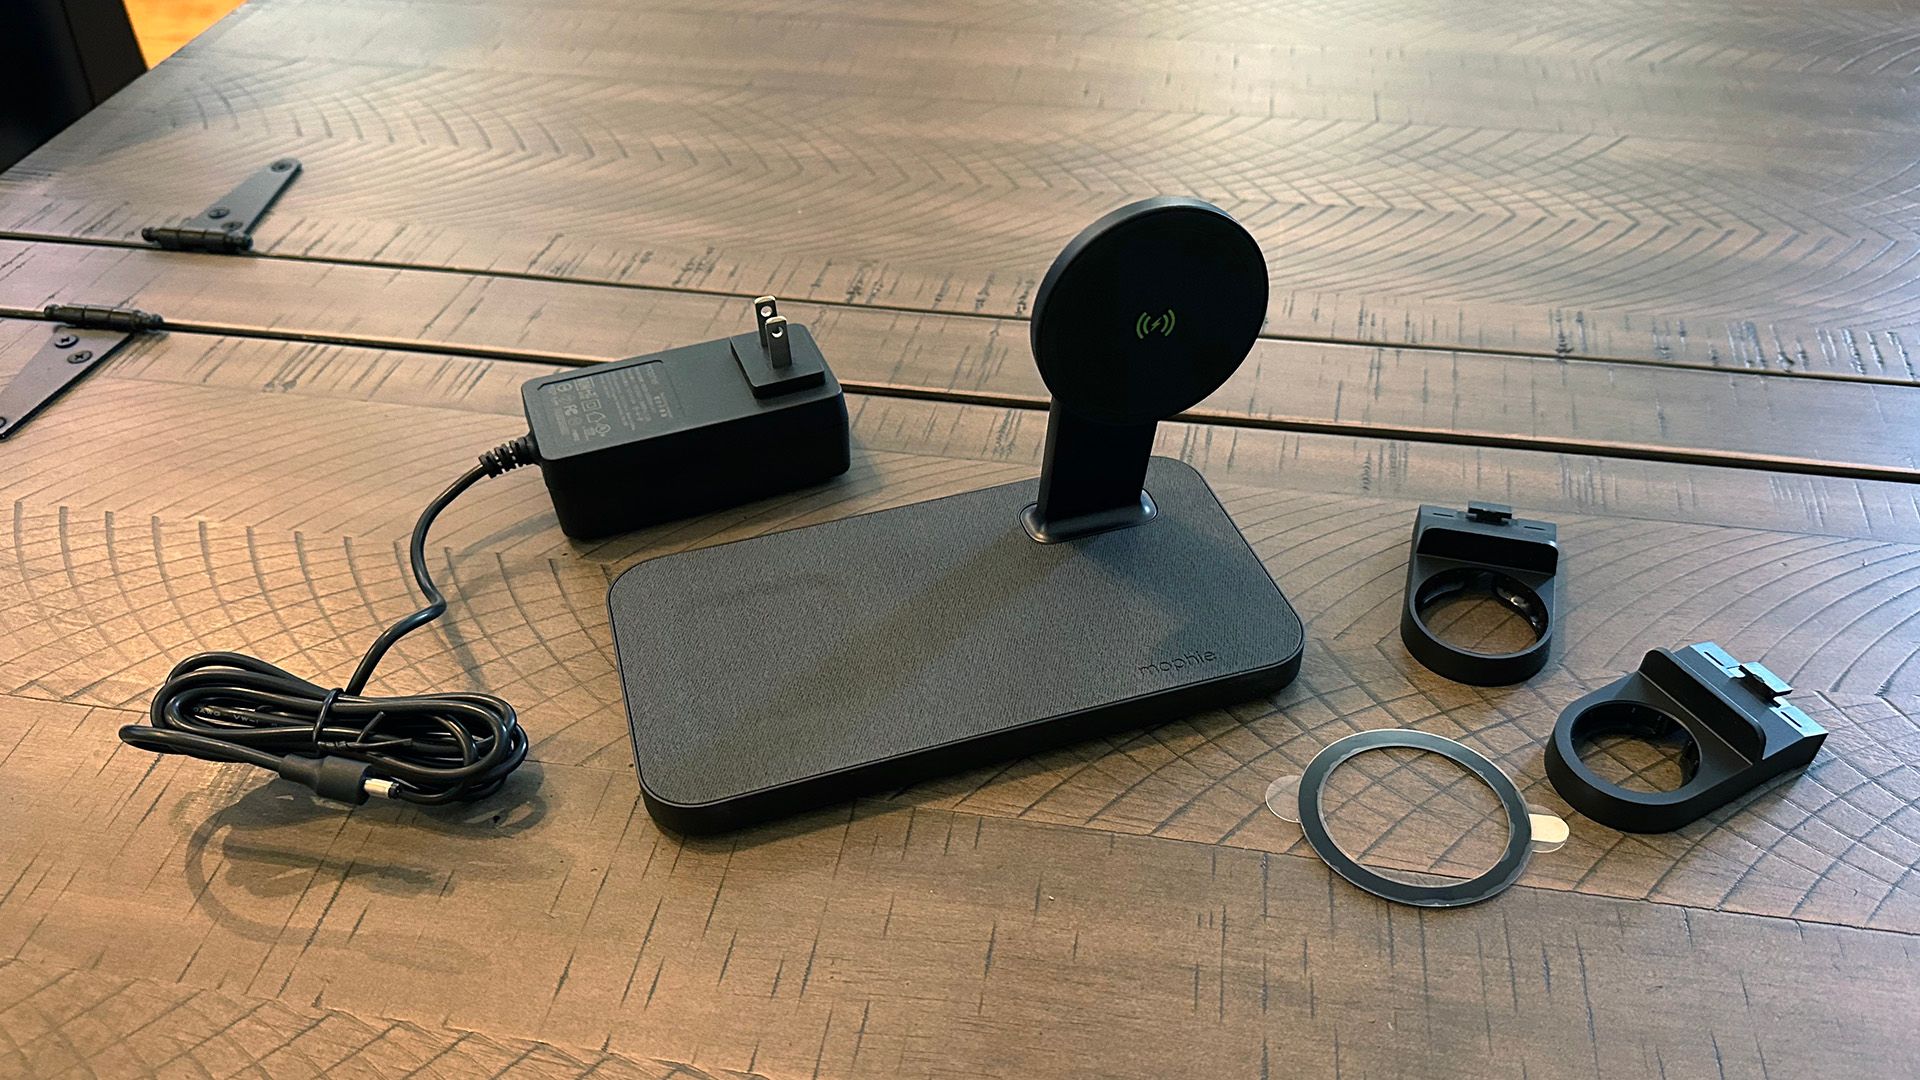 Mophie snap+, AC adapter, snap adapter, and watch adapters on a table top